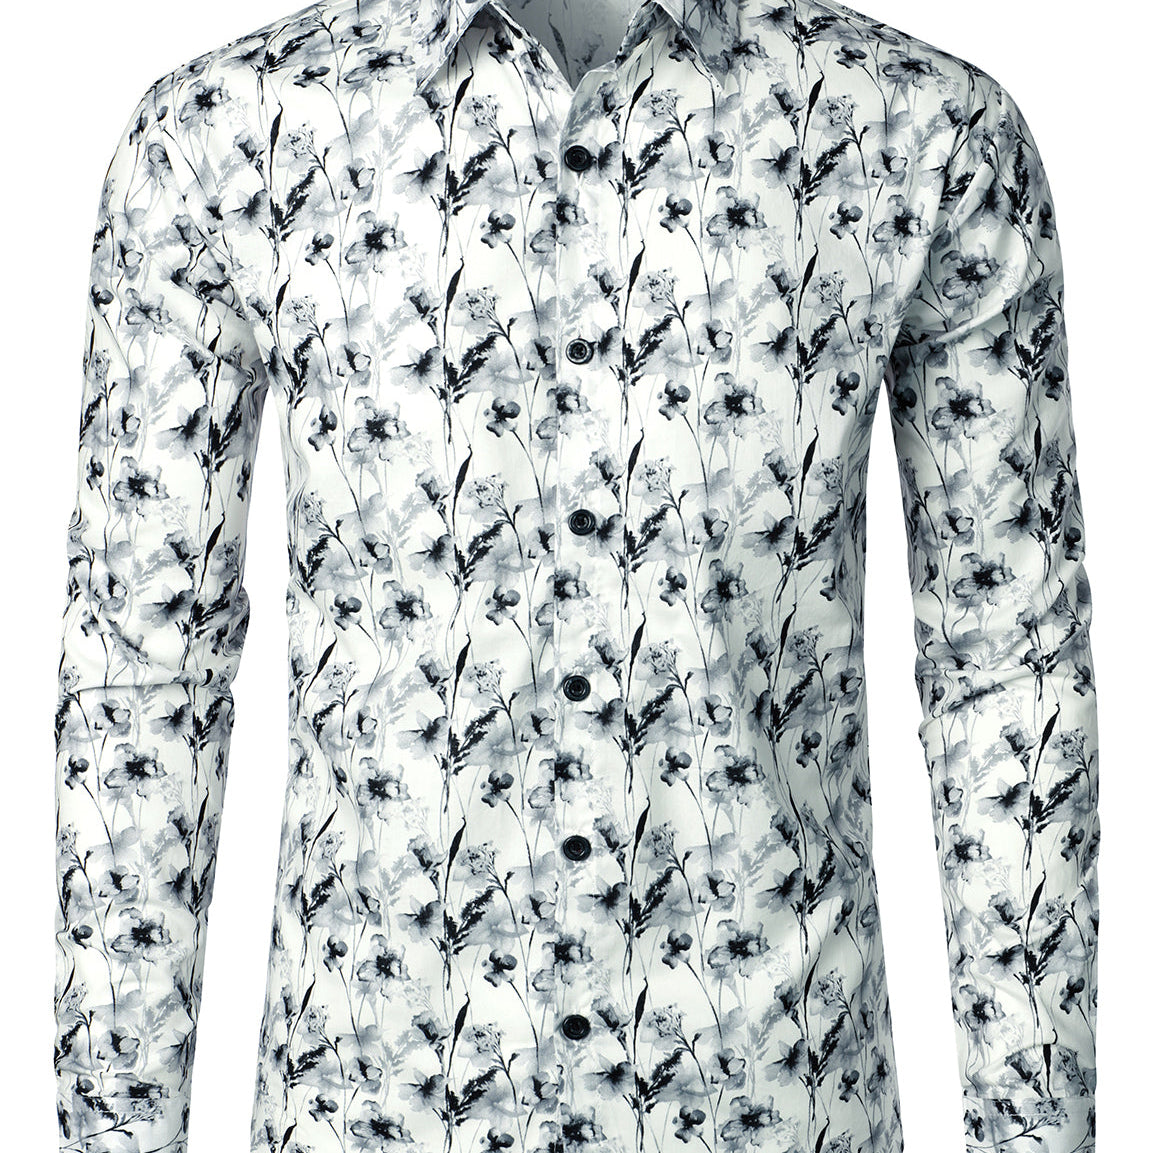 Men's Casual Cotton Floral Print Breathable White Long Sleeve Shirt